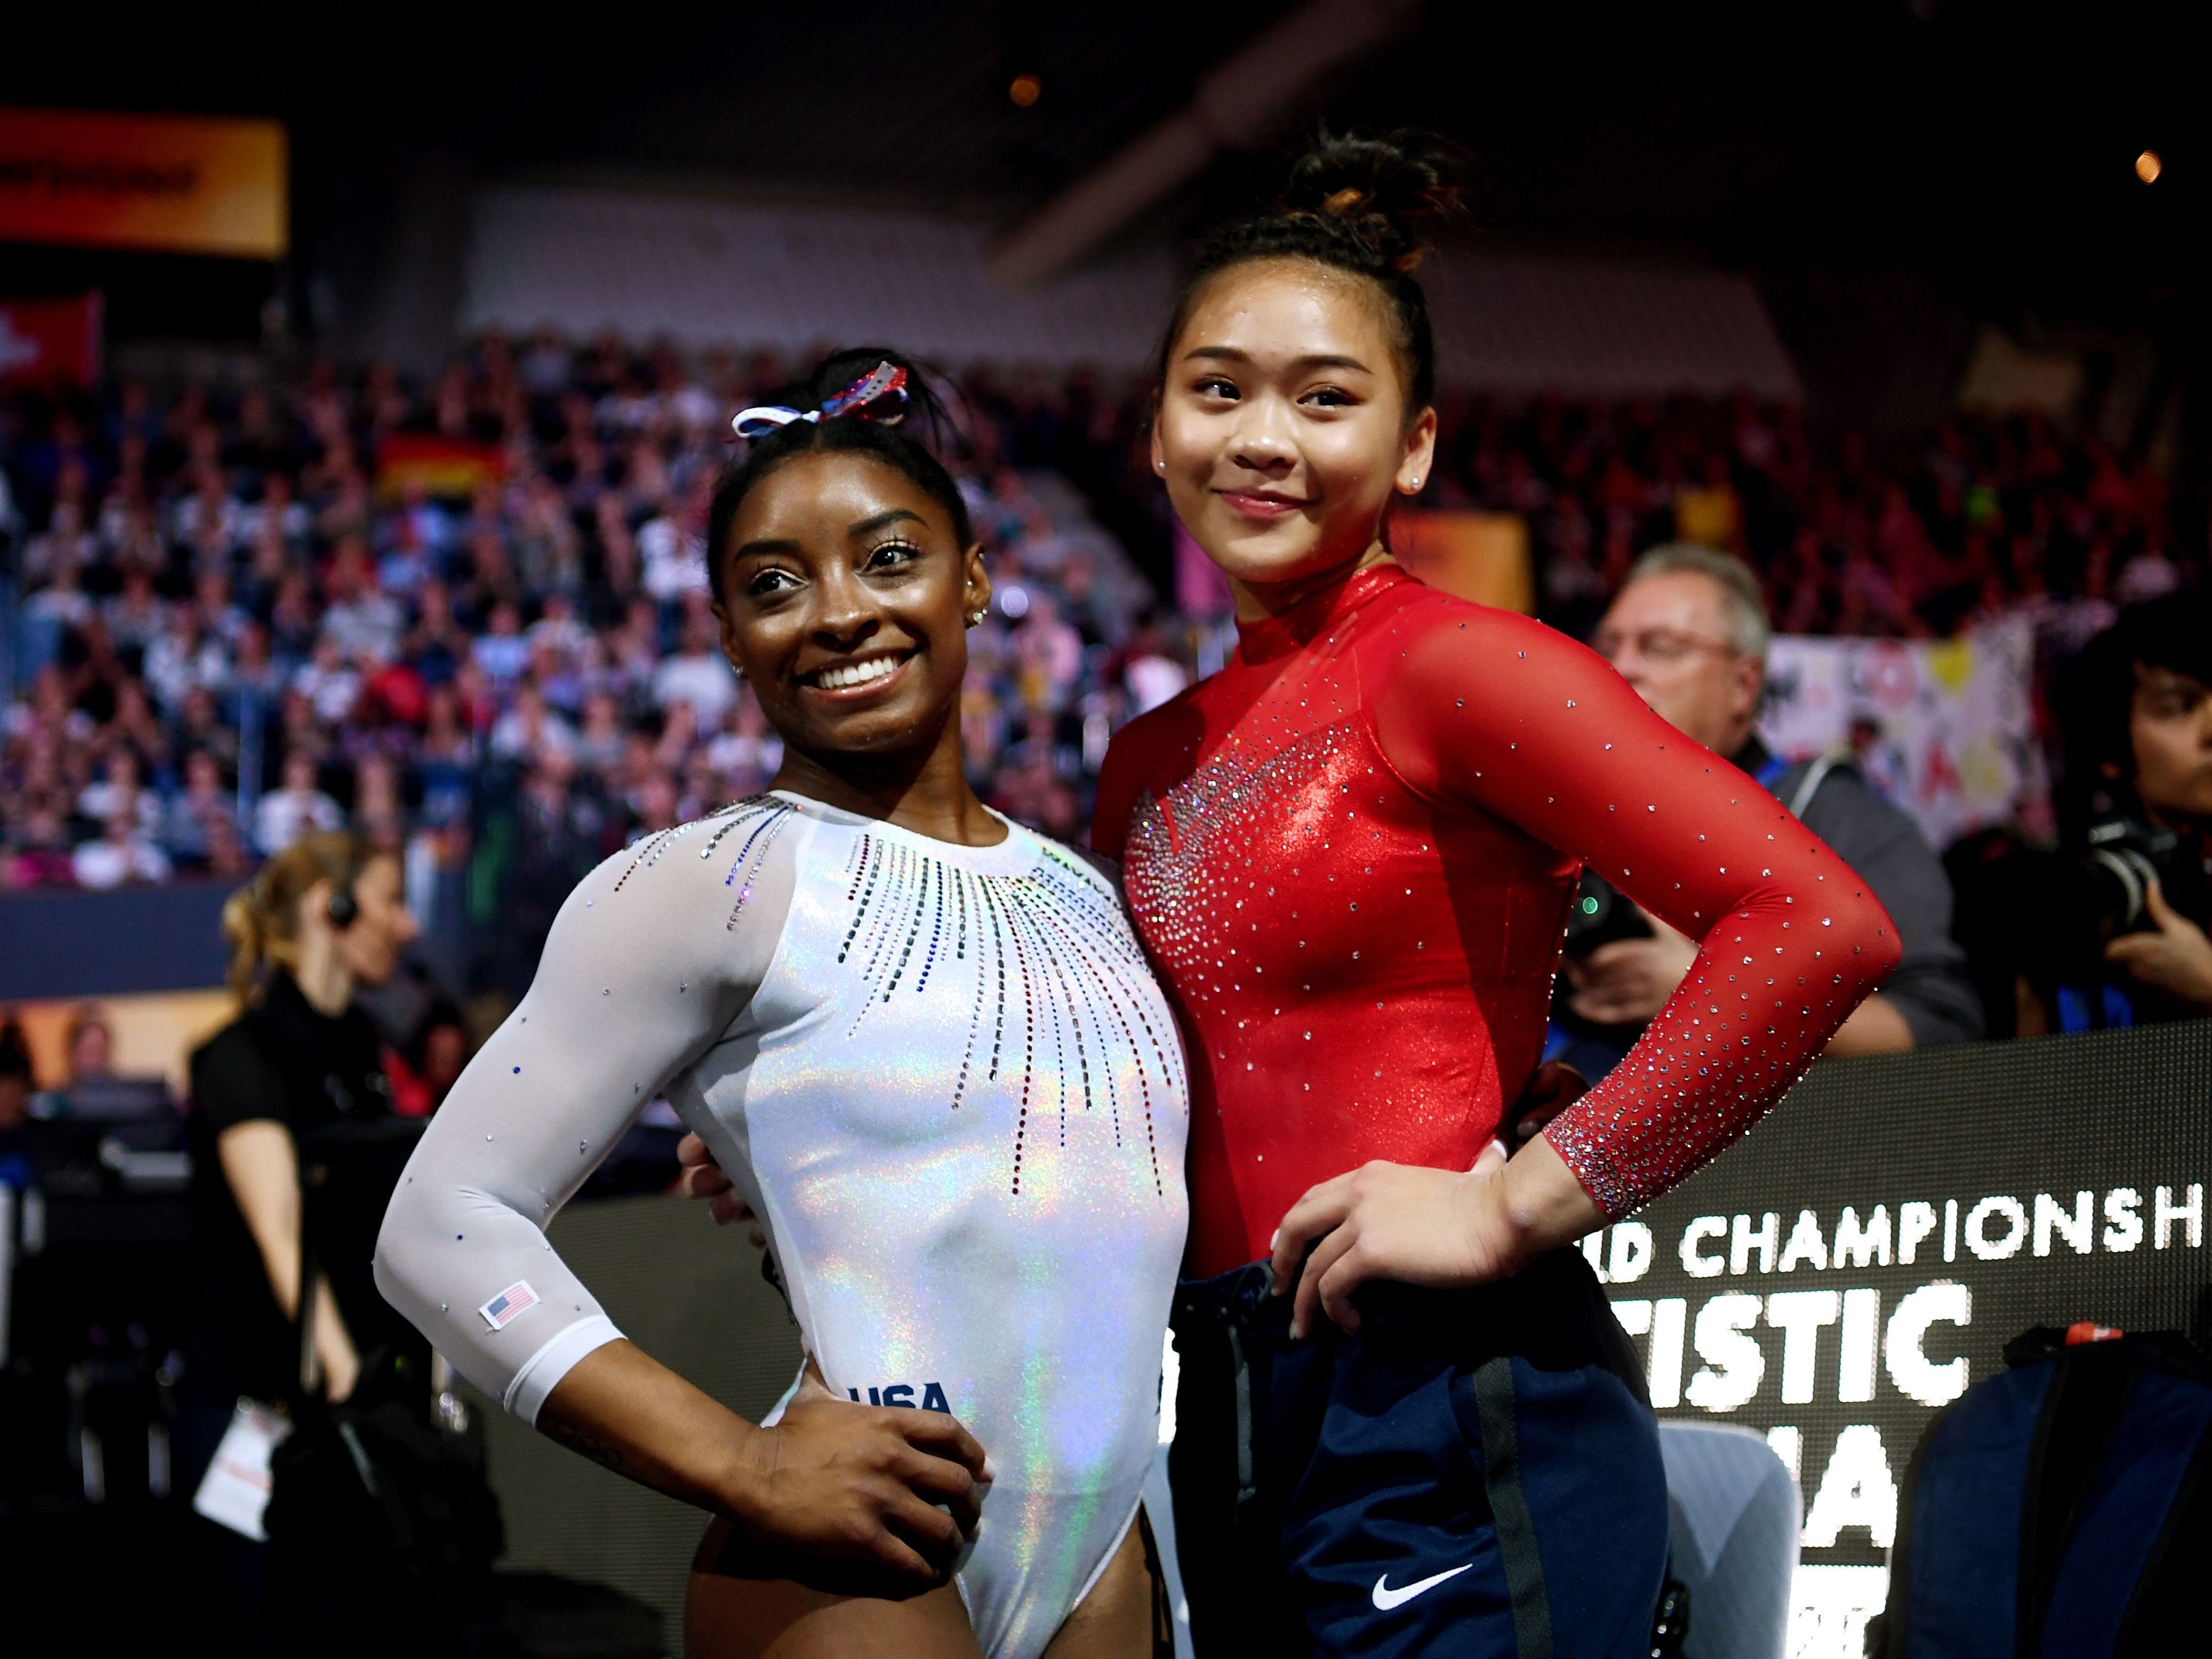 Simone Biles and Sunisa Lee at the 2020 Tokyo Olympics (via getty images)